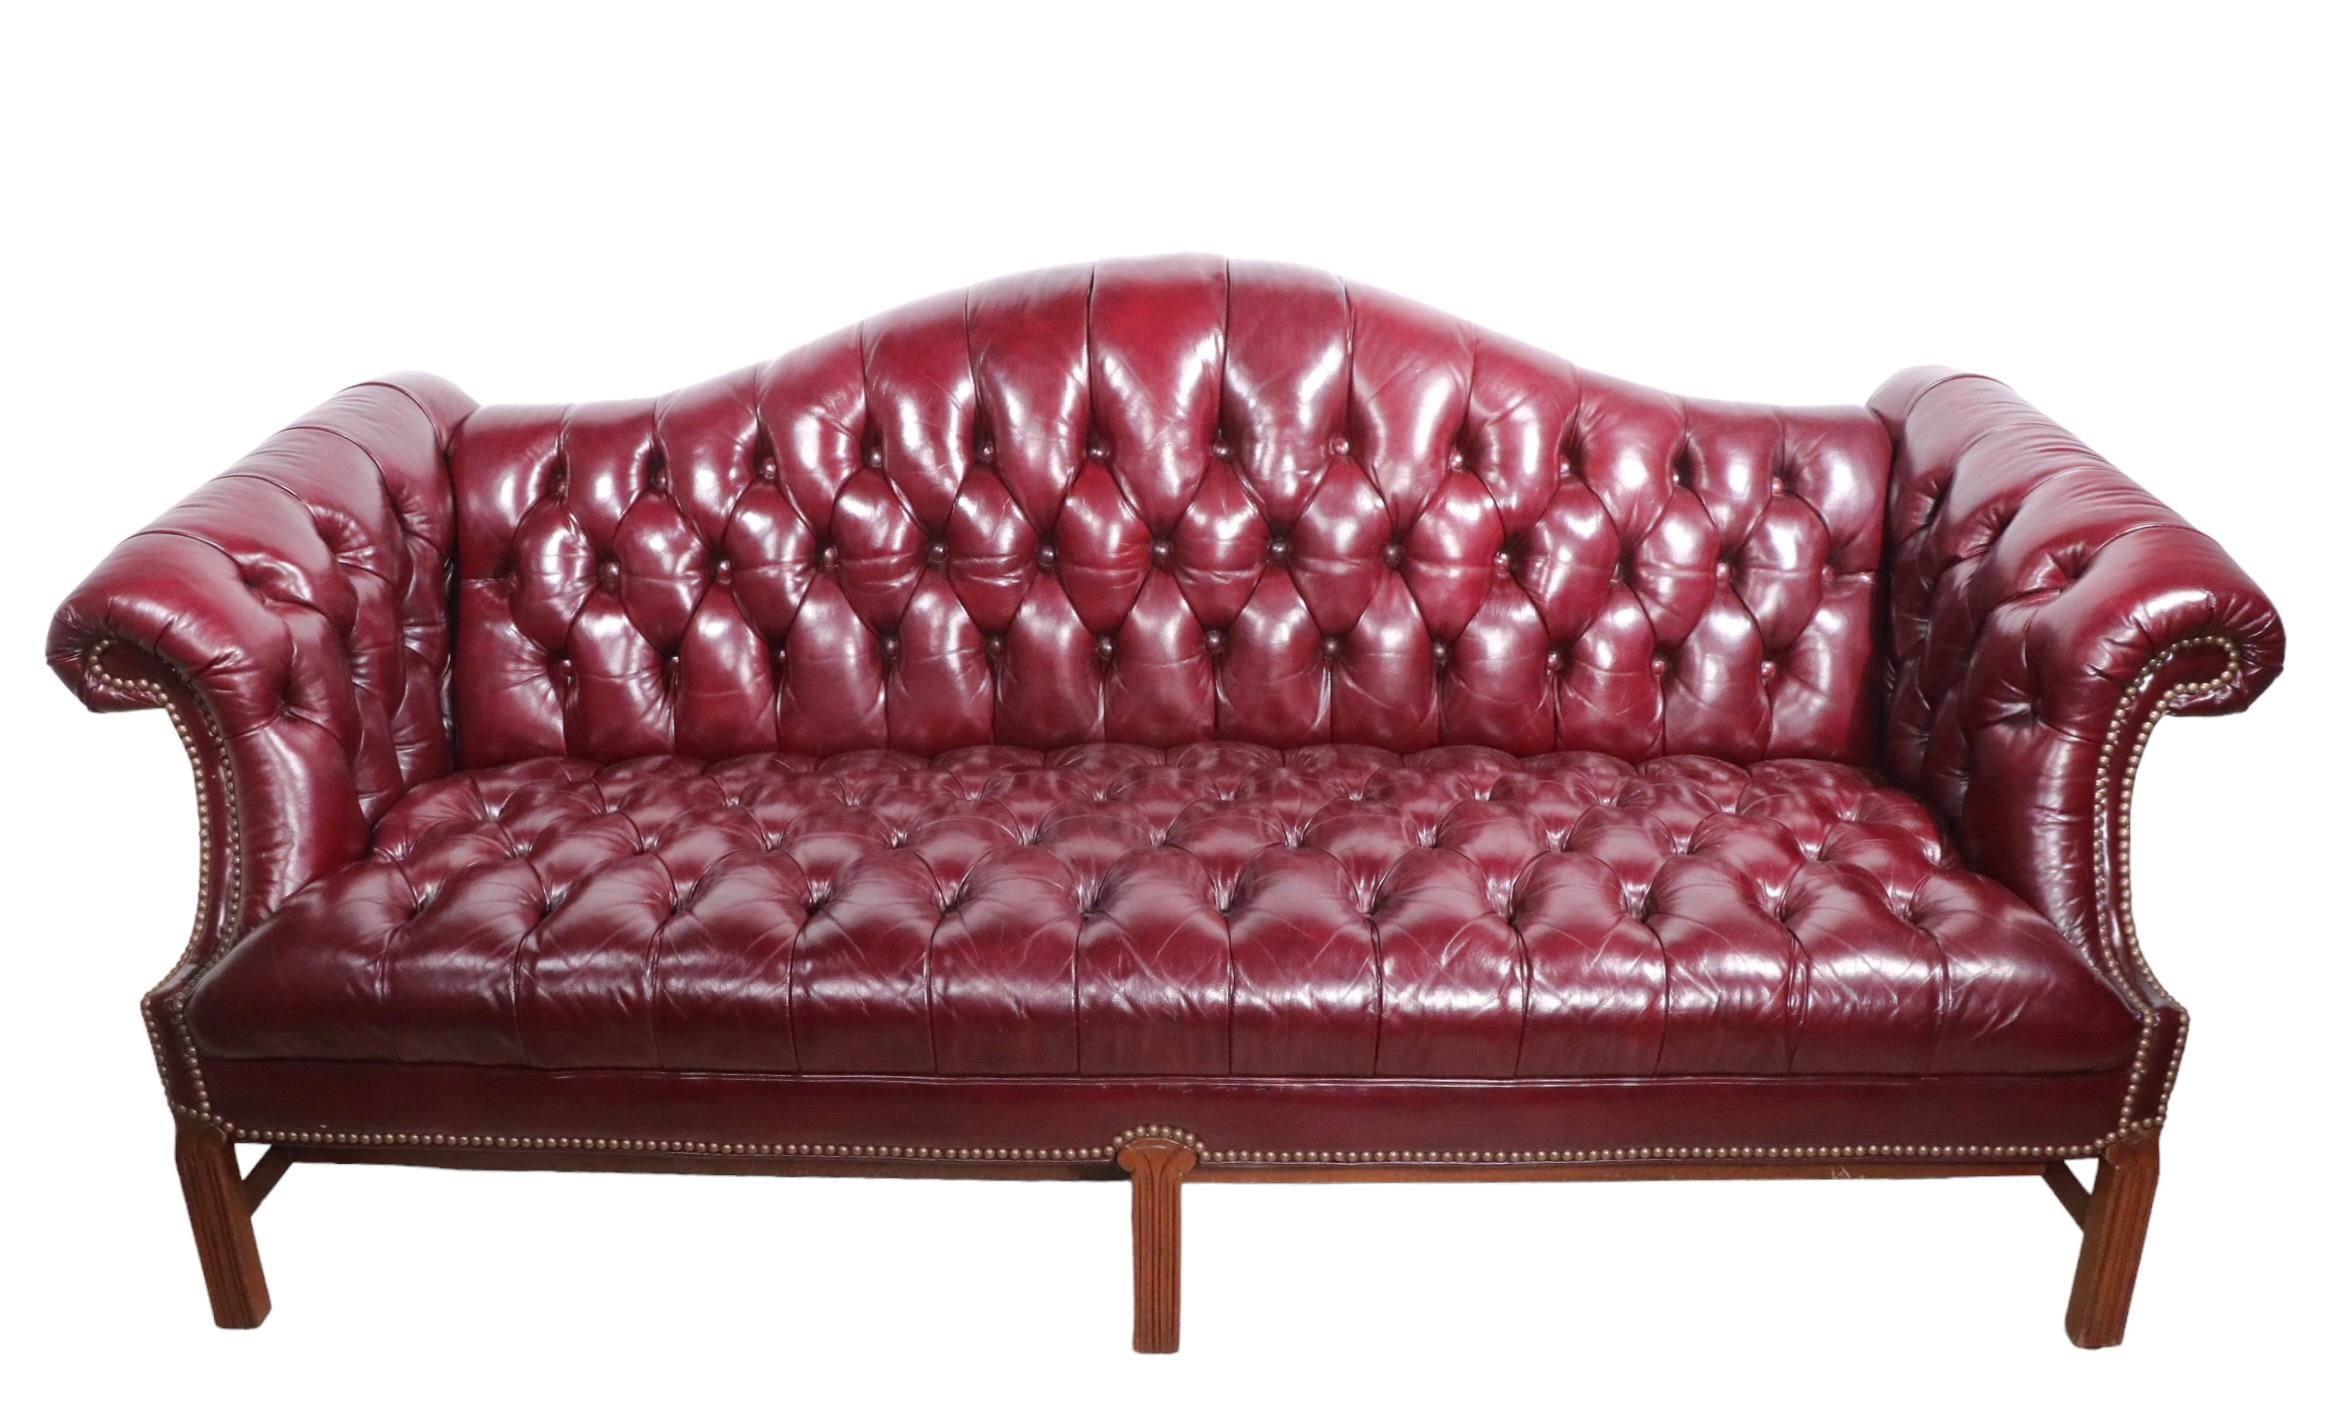  Tufted Burgundy  Leather Chesterfield Sofa c 1950/1960's In Good Condition For Sale In New York, NY